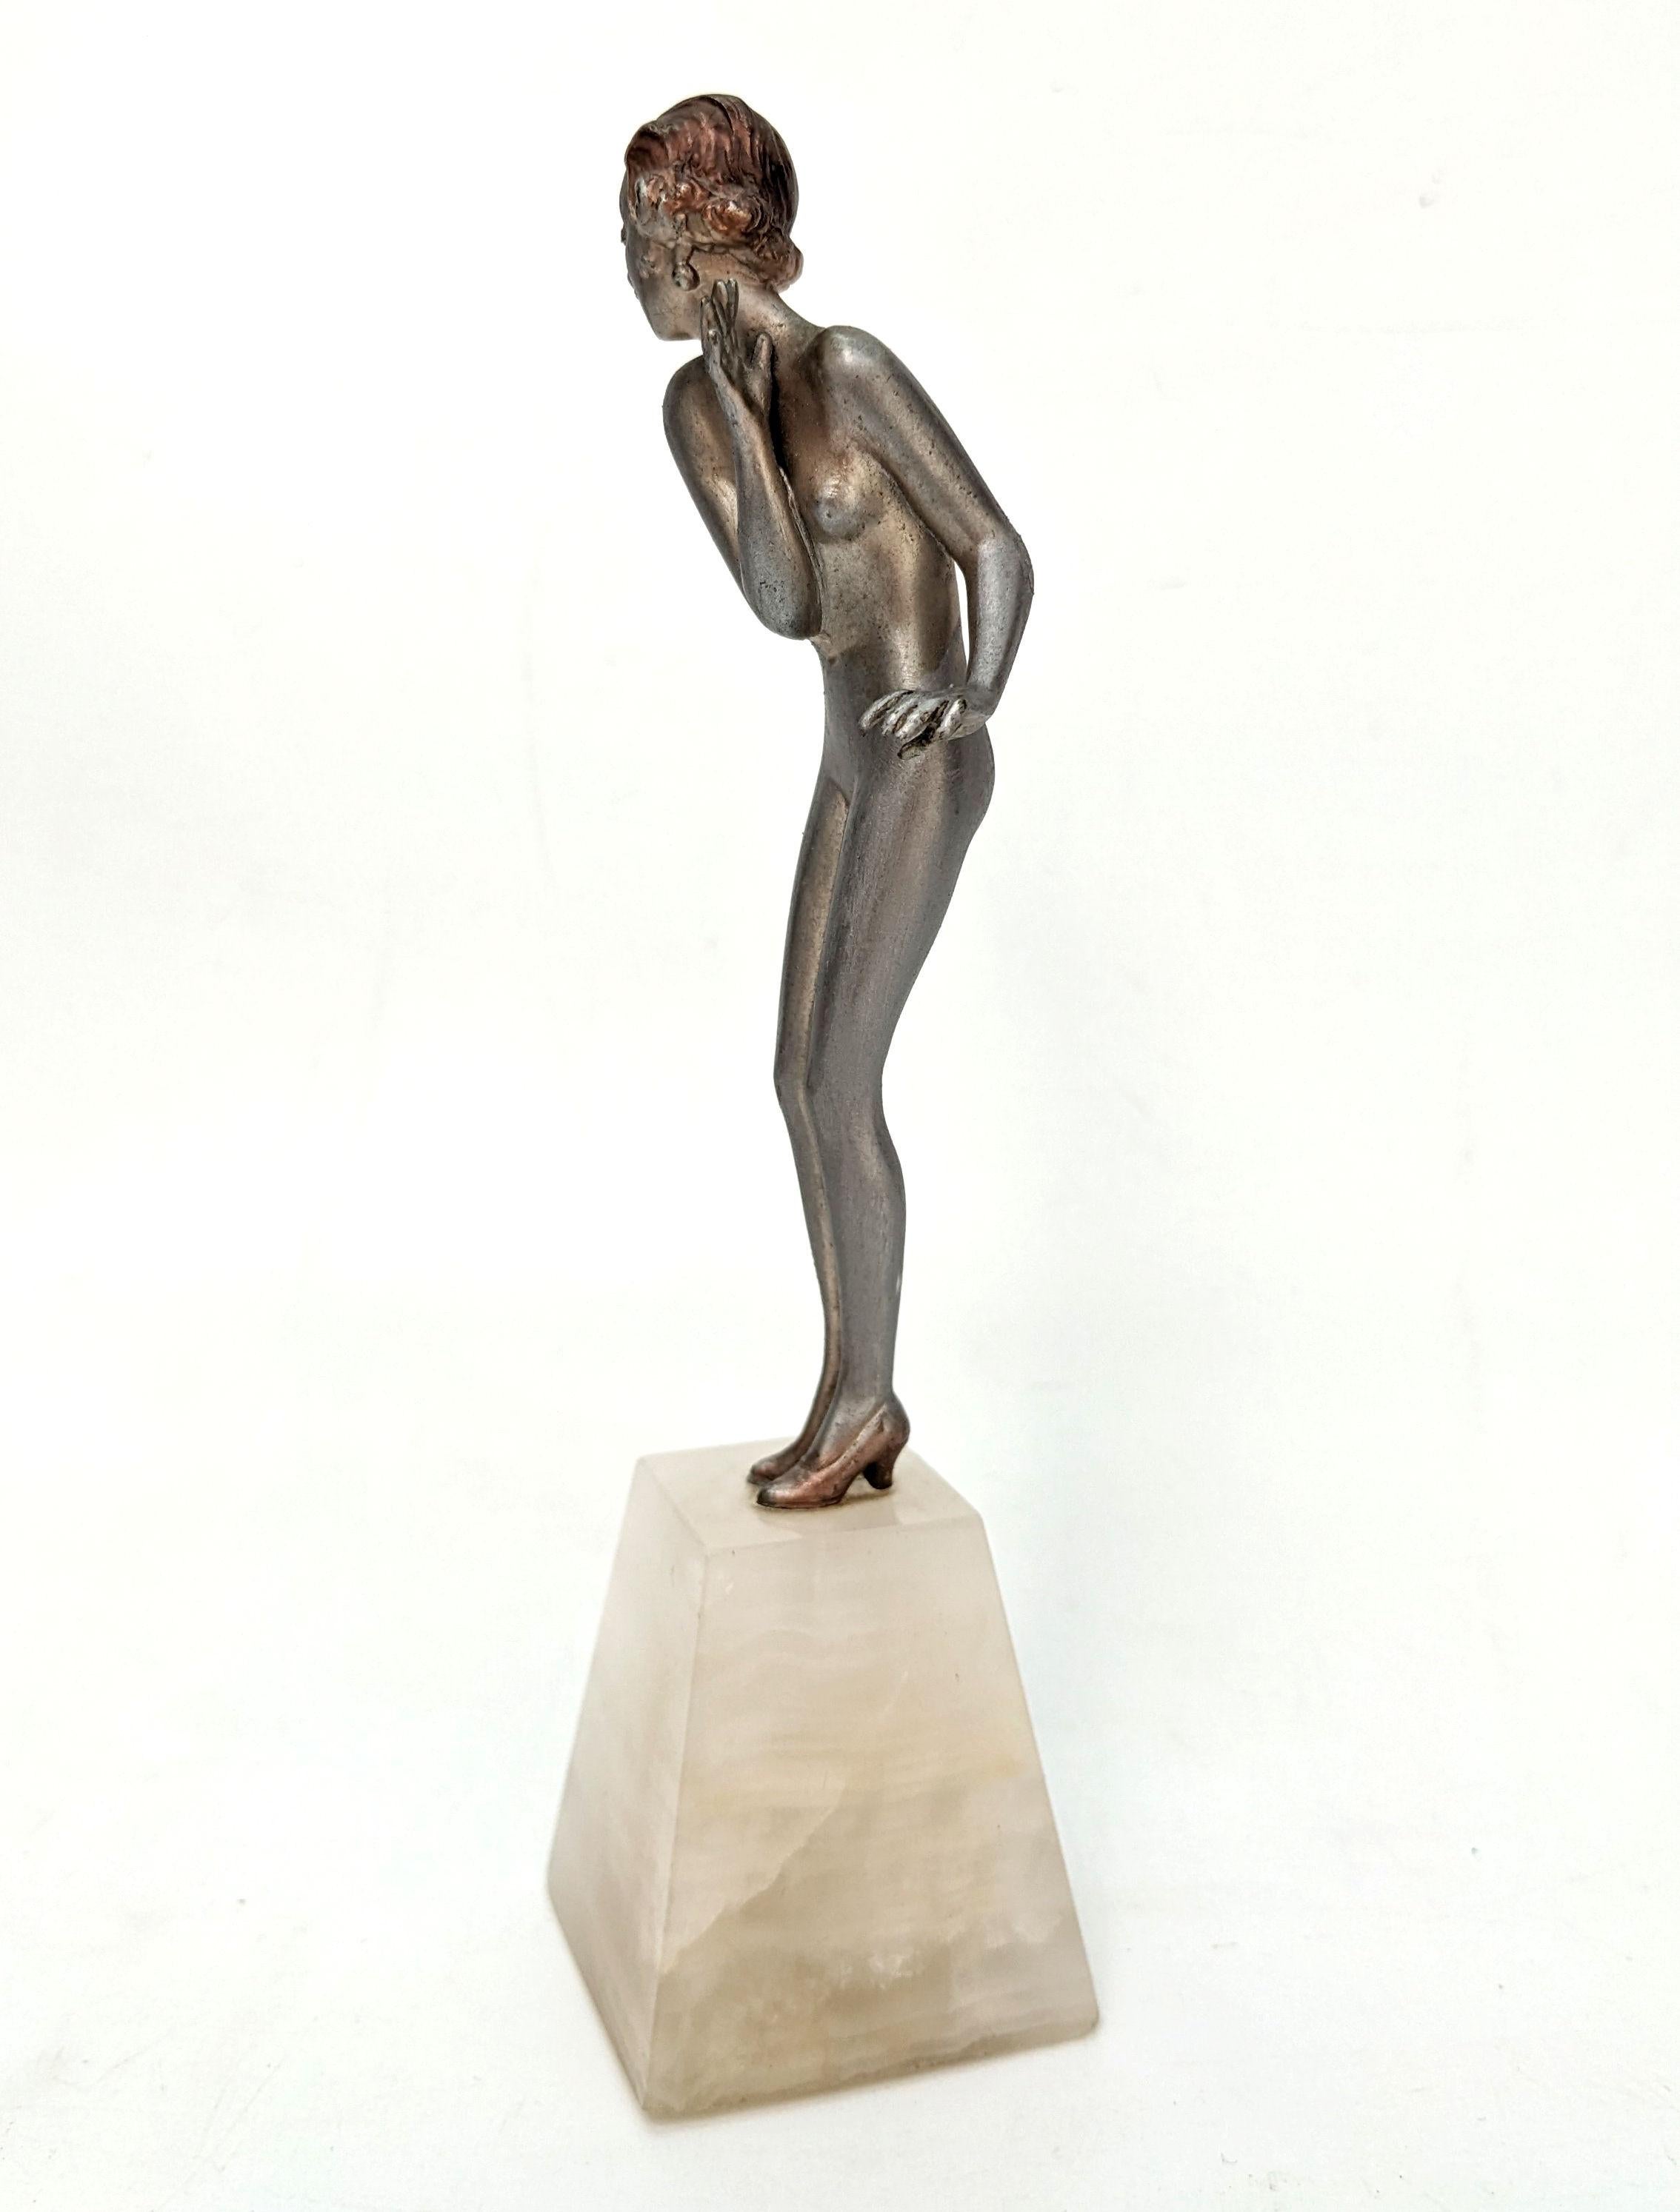 For your consideration is this delightful Art Deco figure depicting a nude young woman. Dating to the 1930's and stood on a Onyx base, although not signed we believe this figure to be by Josef Lorenzl. The detailing is lovely, from the crimped bob